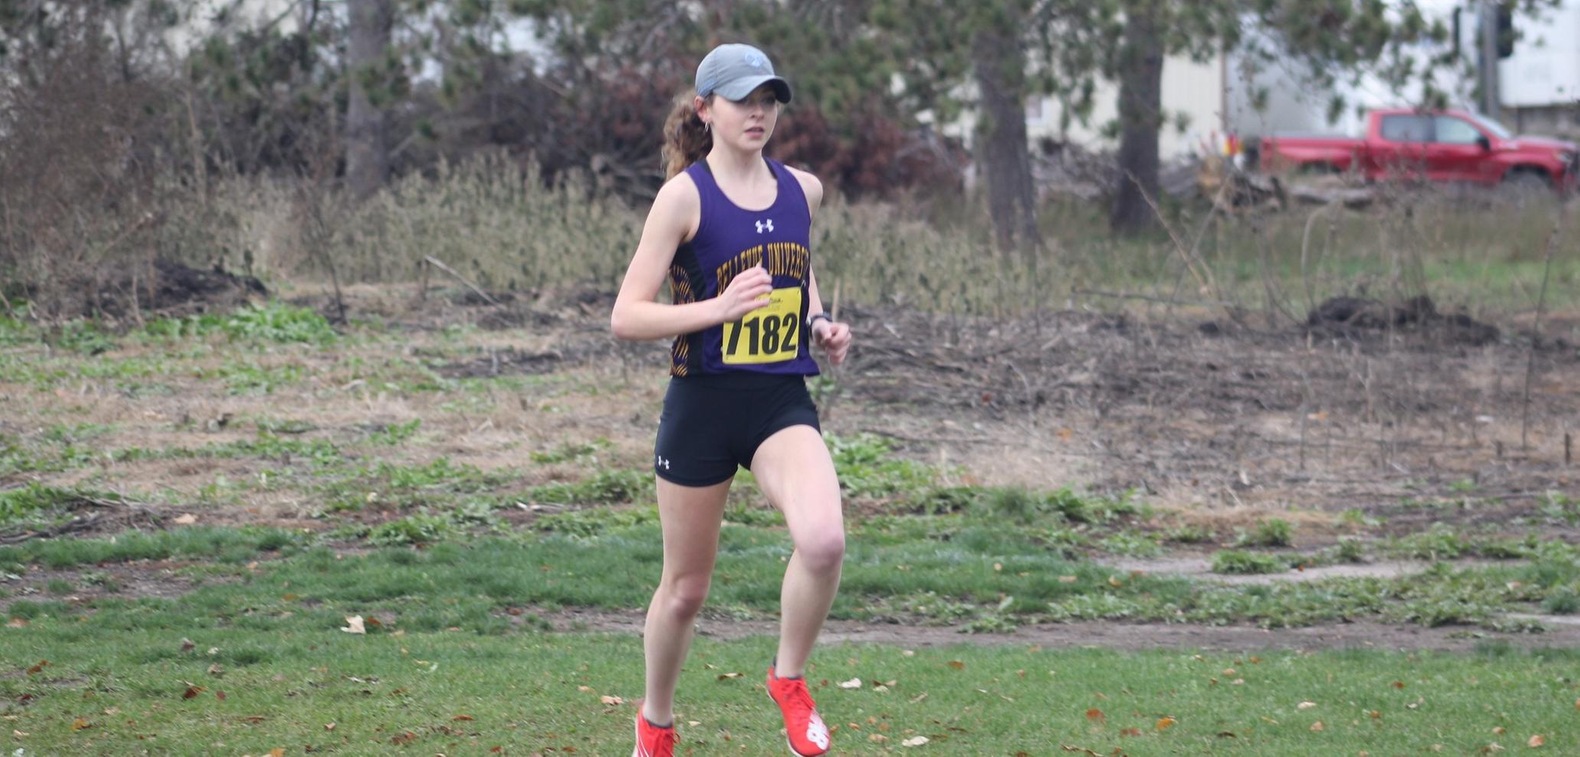 Nelson secures third trip to Nationals with Runner-up finish at NSAA